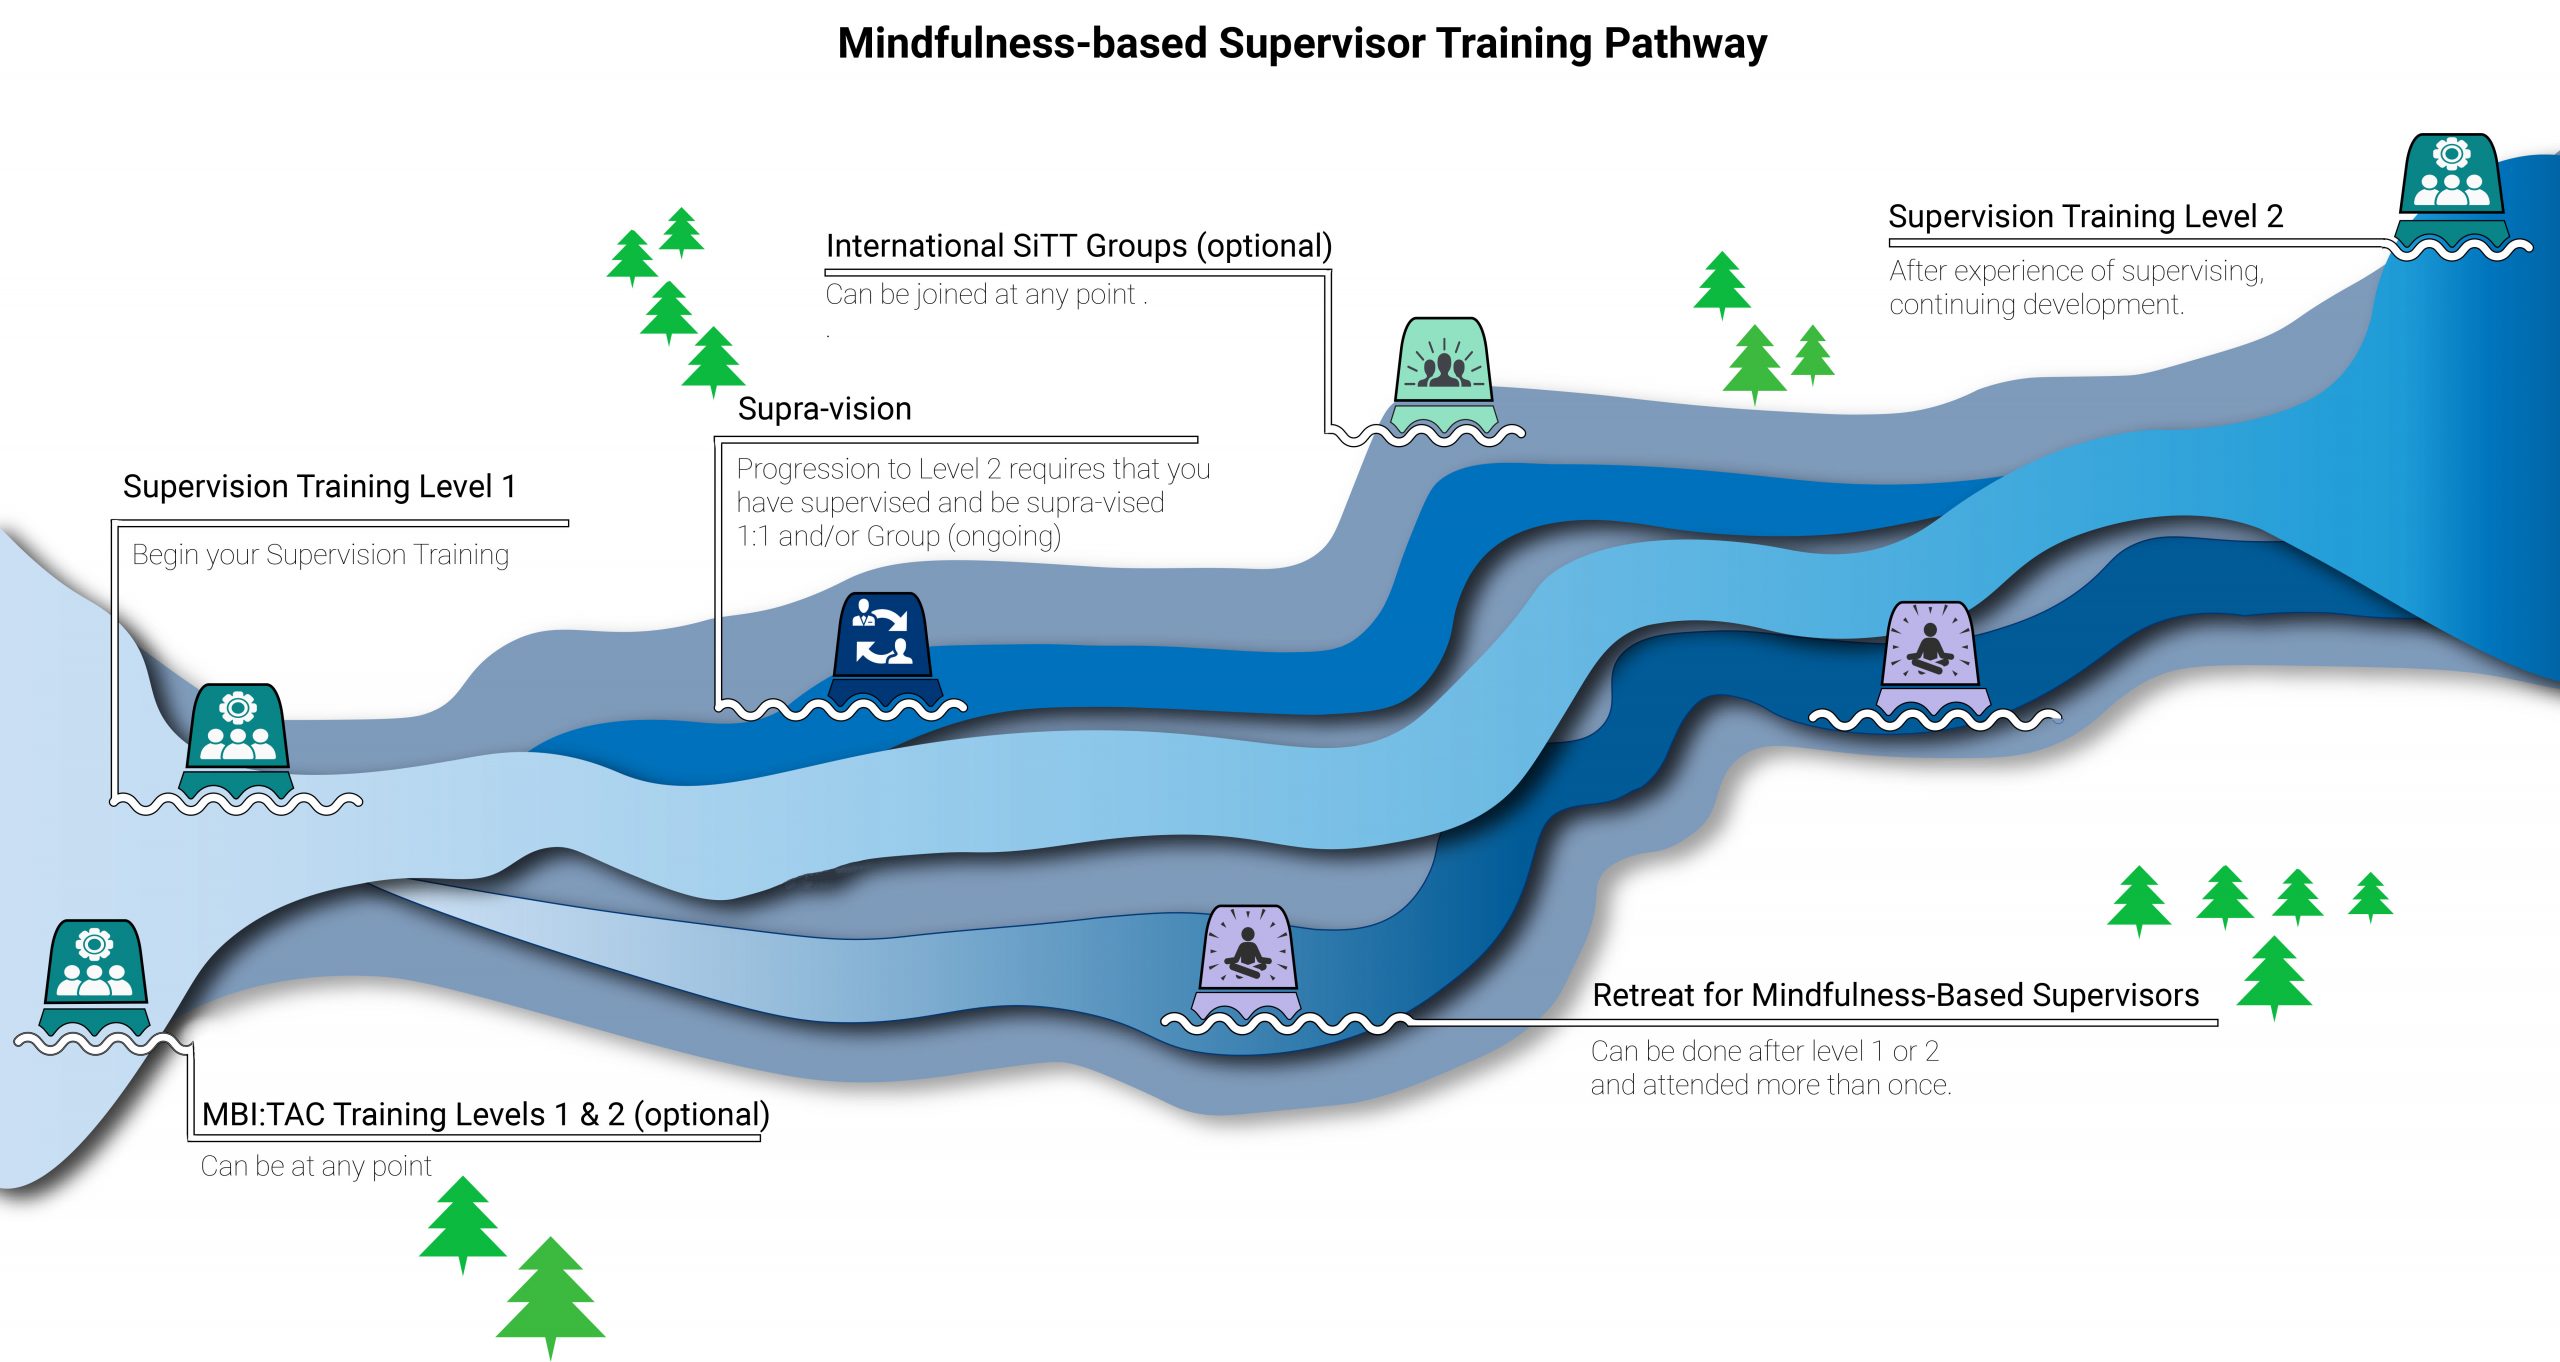 An infographic depicting a blue river. From left to right, along the river, markers show the various elements of the Supervisor Training Pathway: Level 1, Supra-vision, Retreat and Level 2.